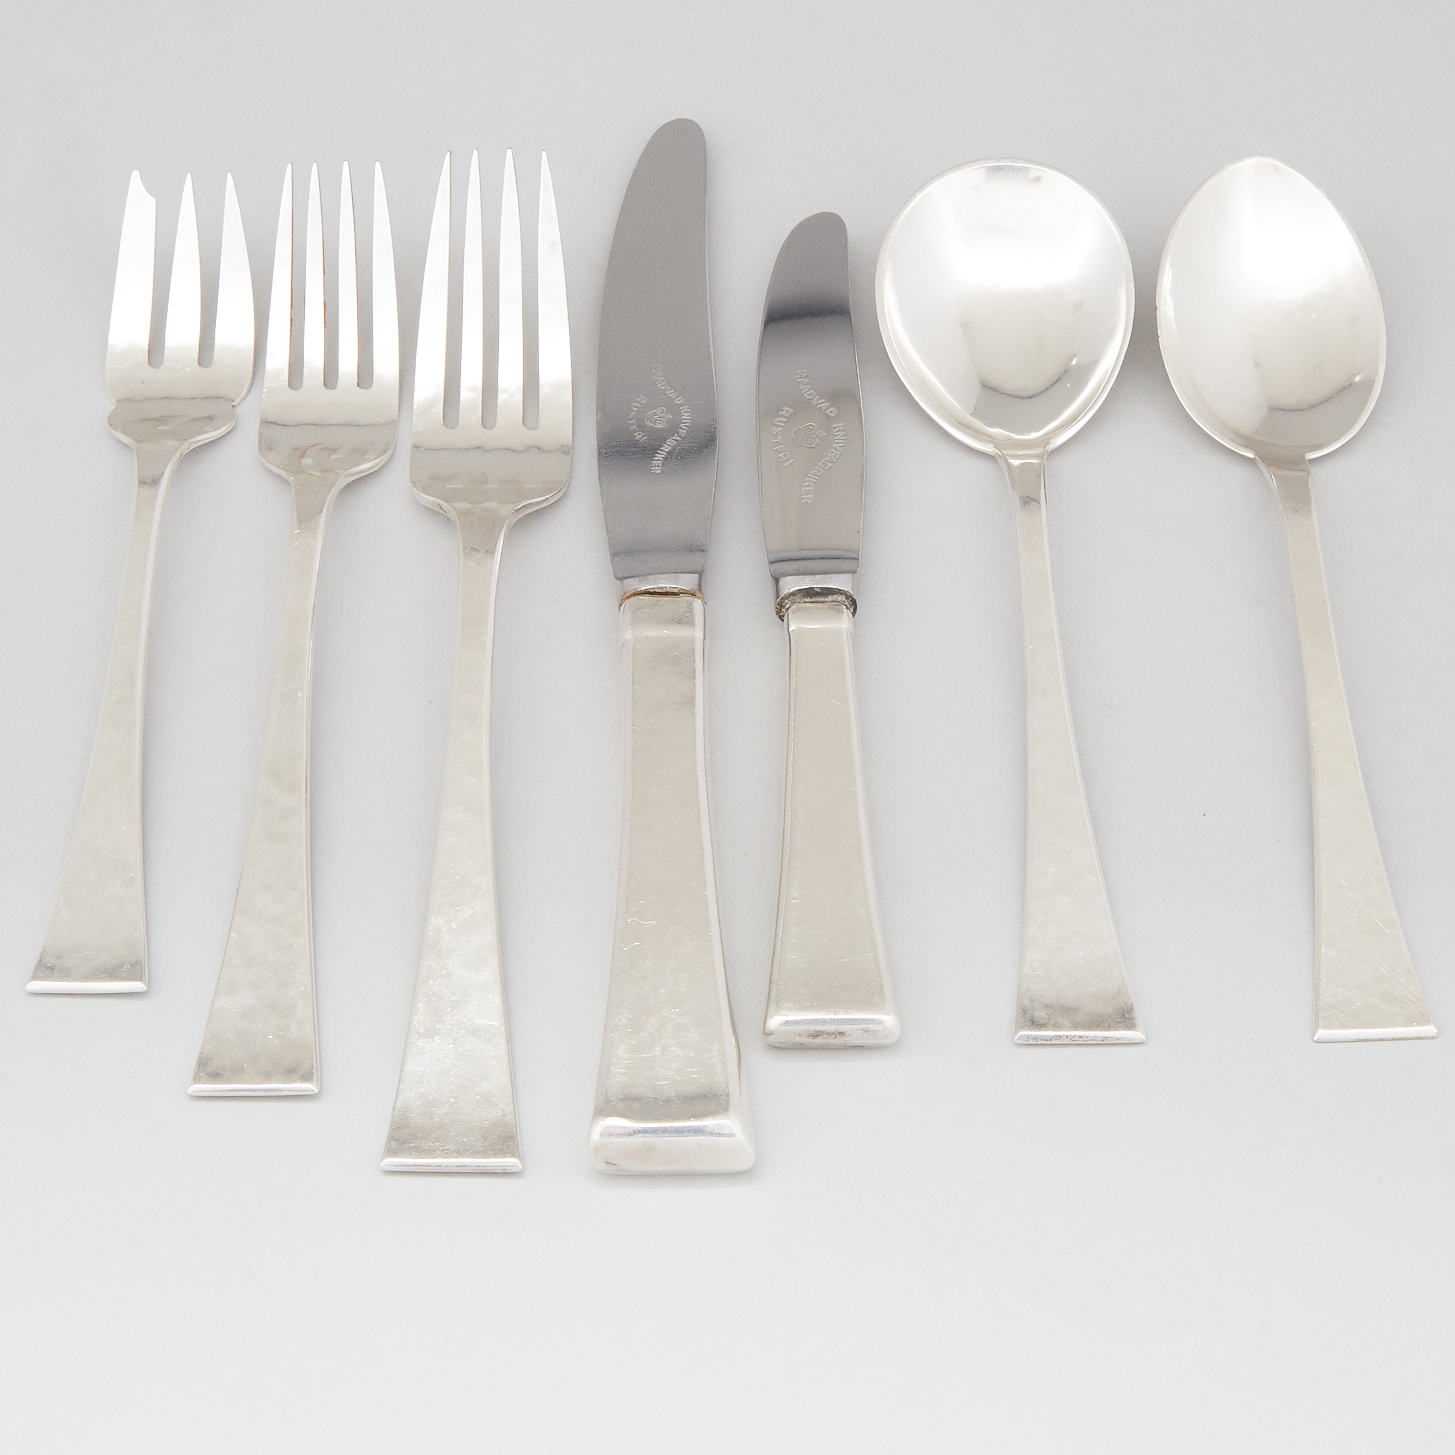 Canadian Silver Flatware Service, Carl Poul Petersen, Montreal, Que., mid-20th century